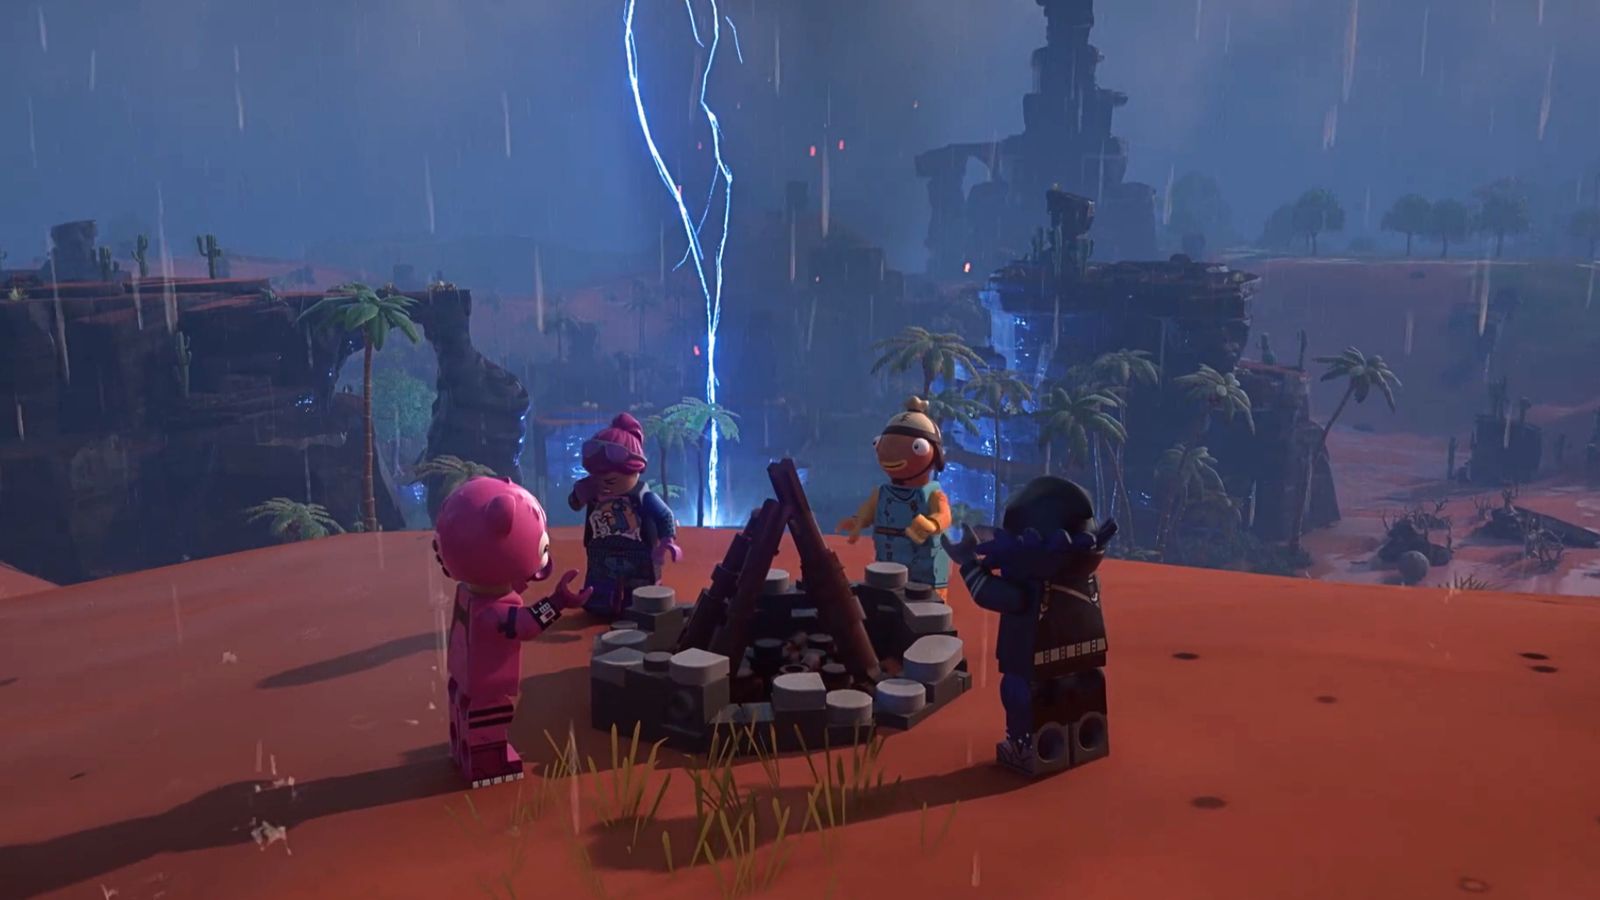 4 LEGO Fortnite characters gathered around a fireplace during a storm